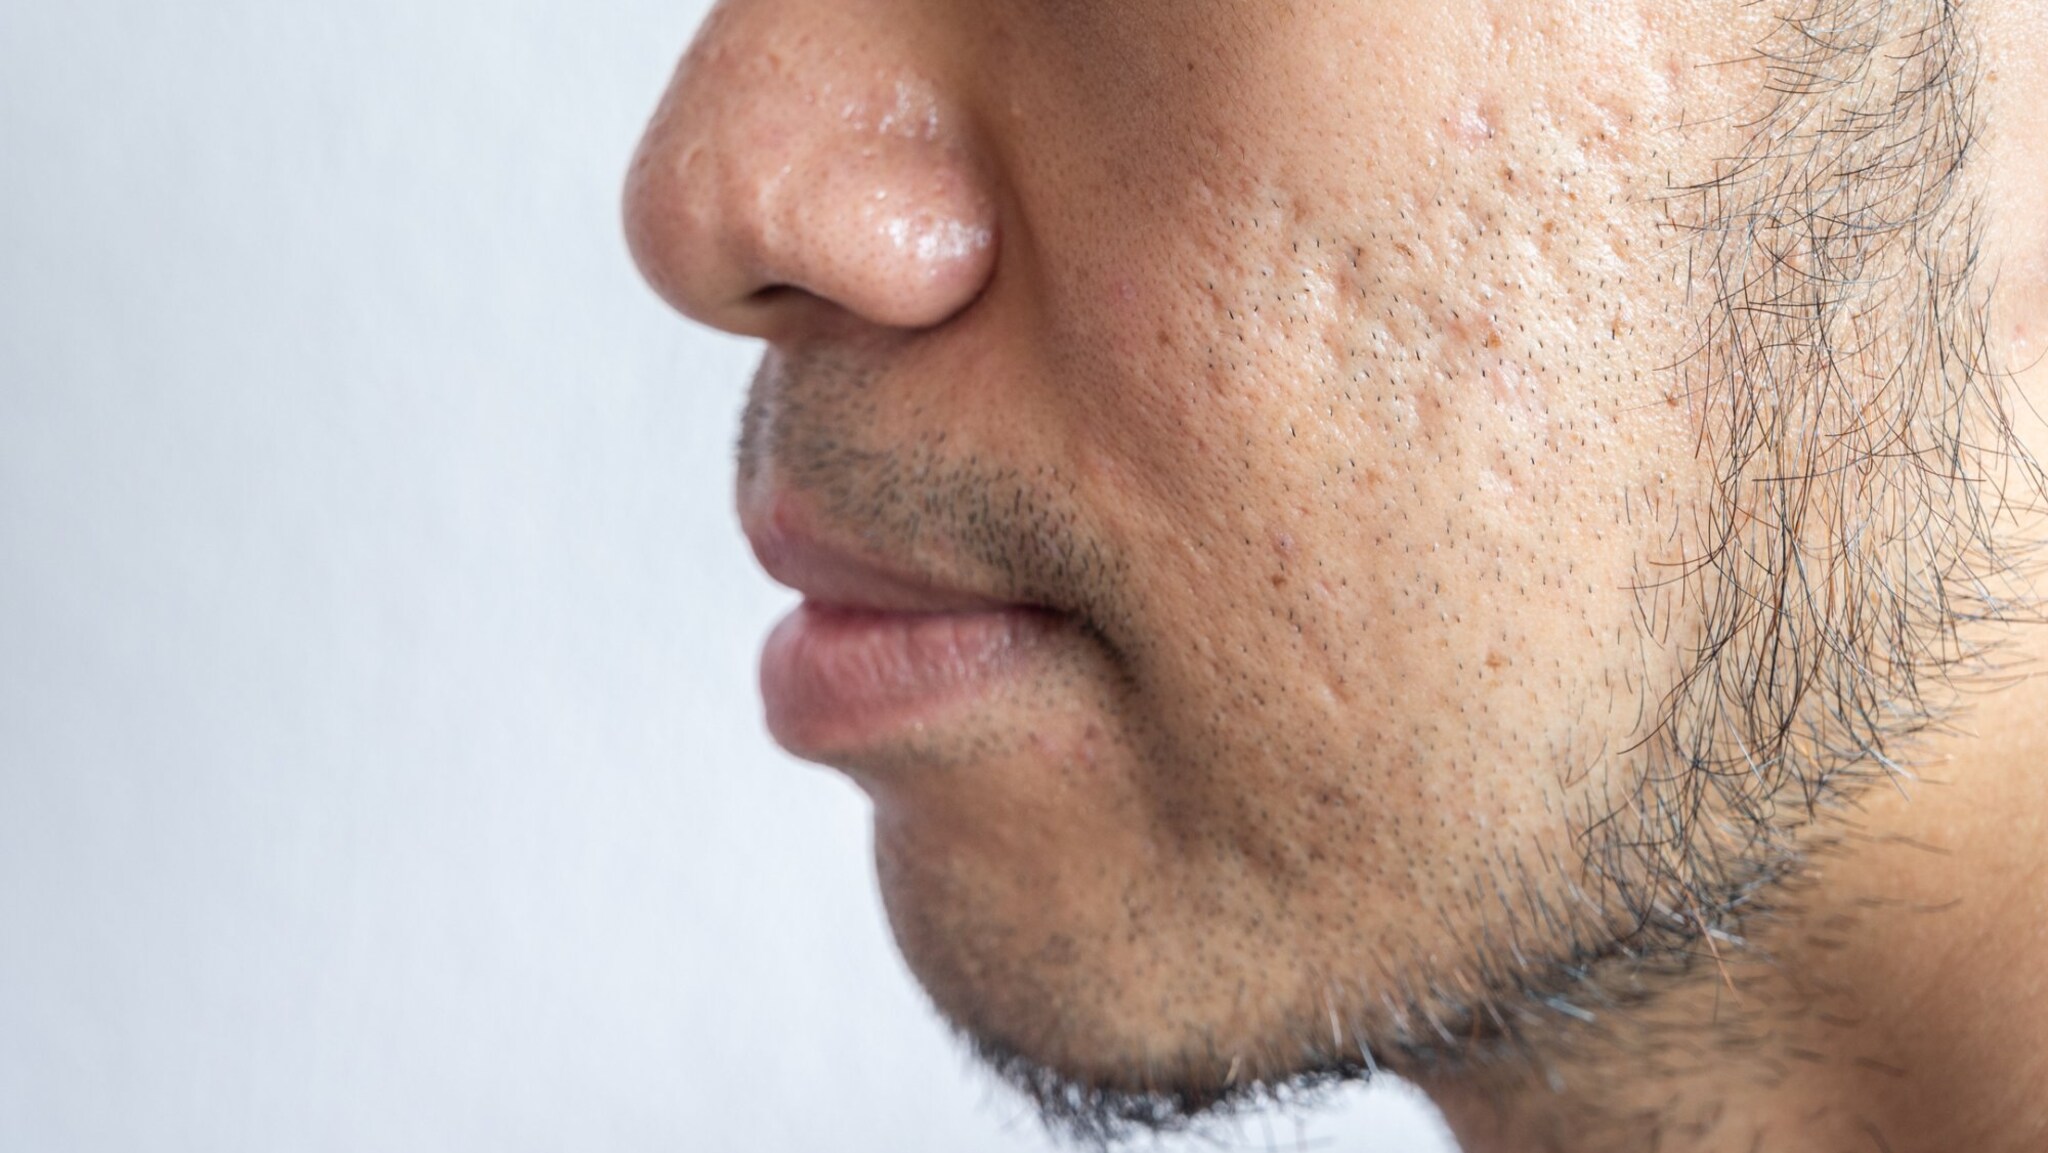 Joke: My son has acne scars on his face.  How can we get that away?